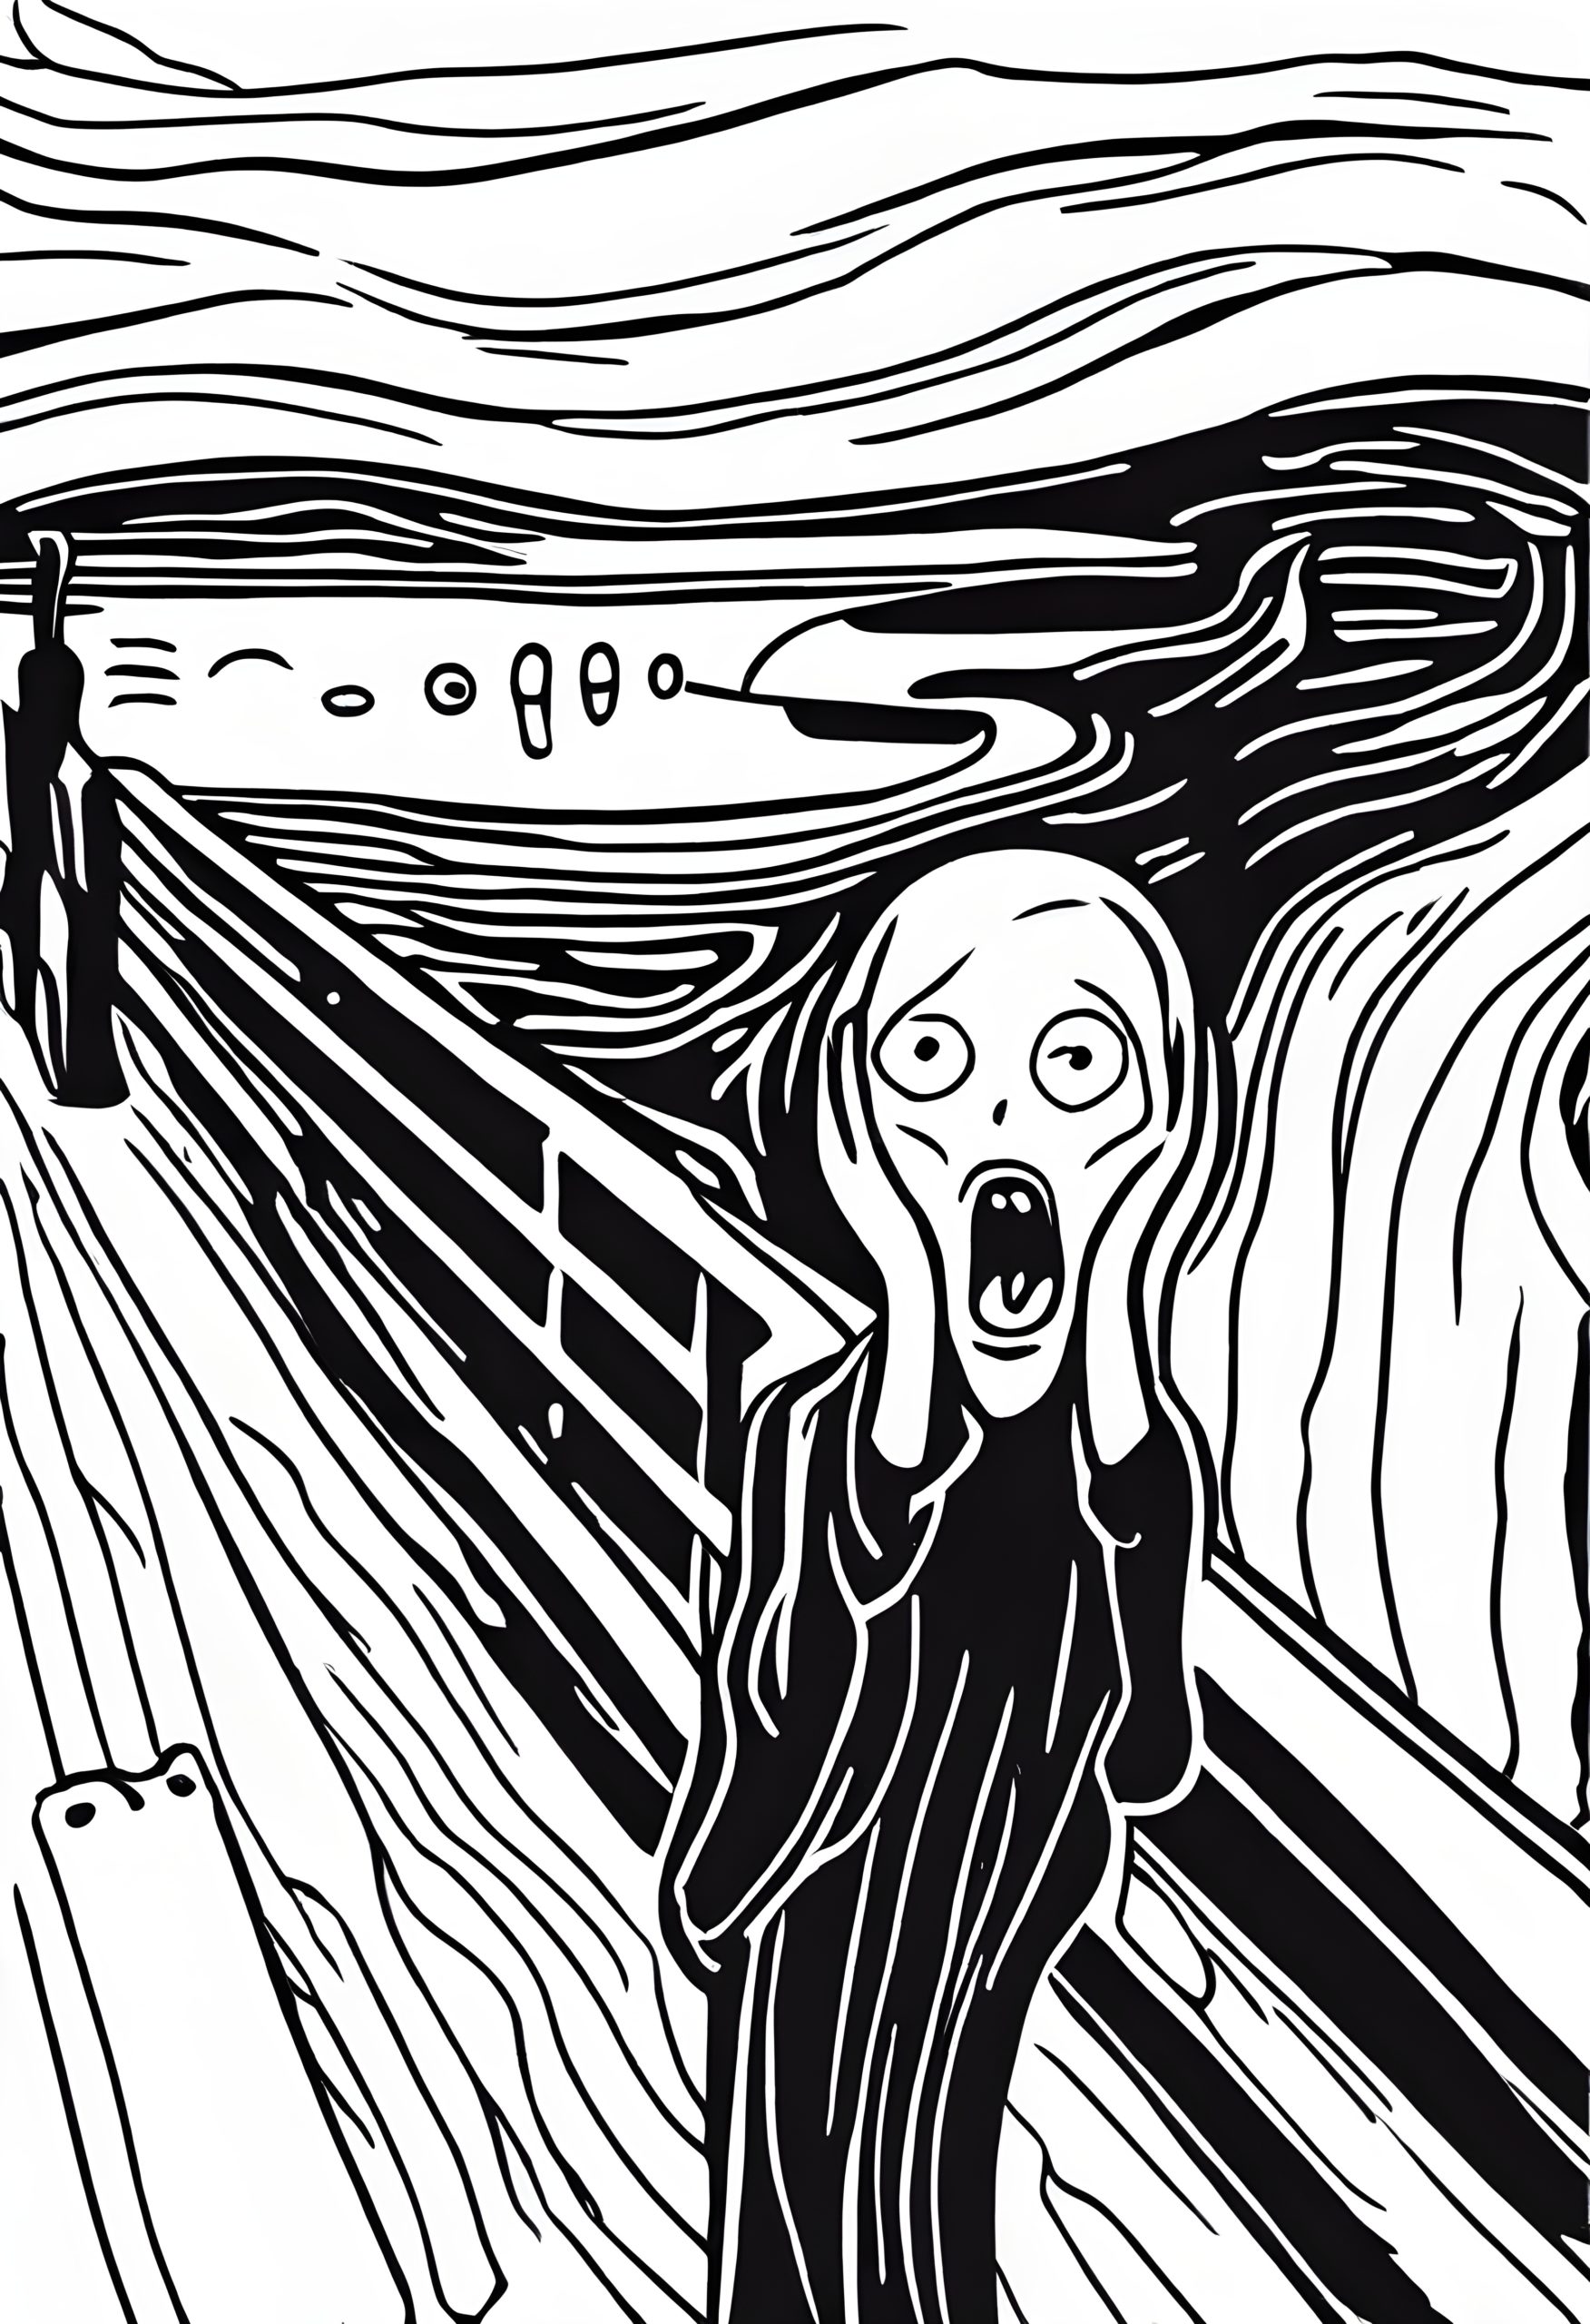 Edvard Munch The Scream coloring page.